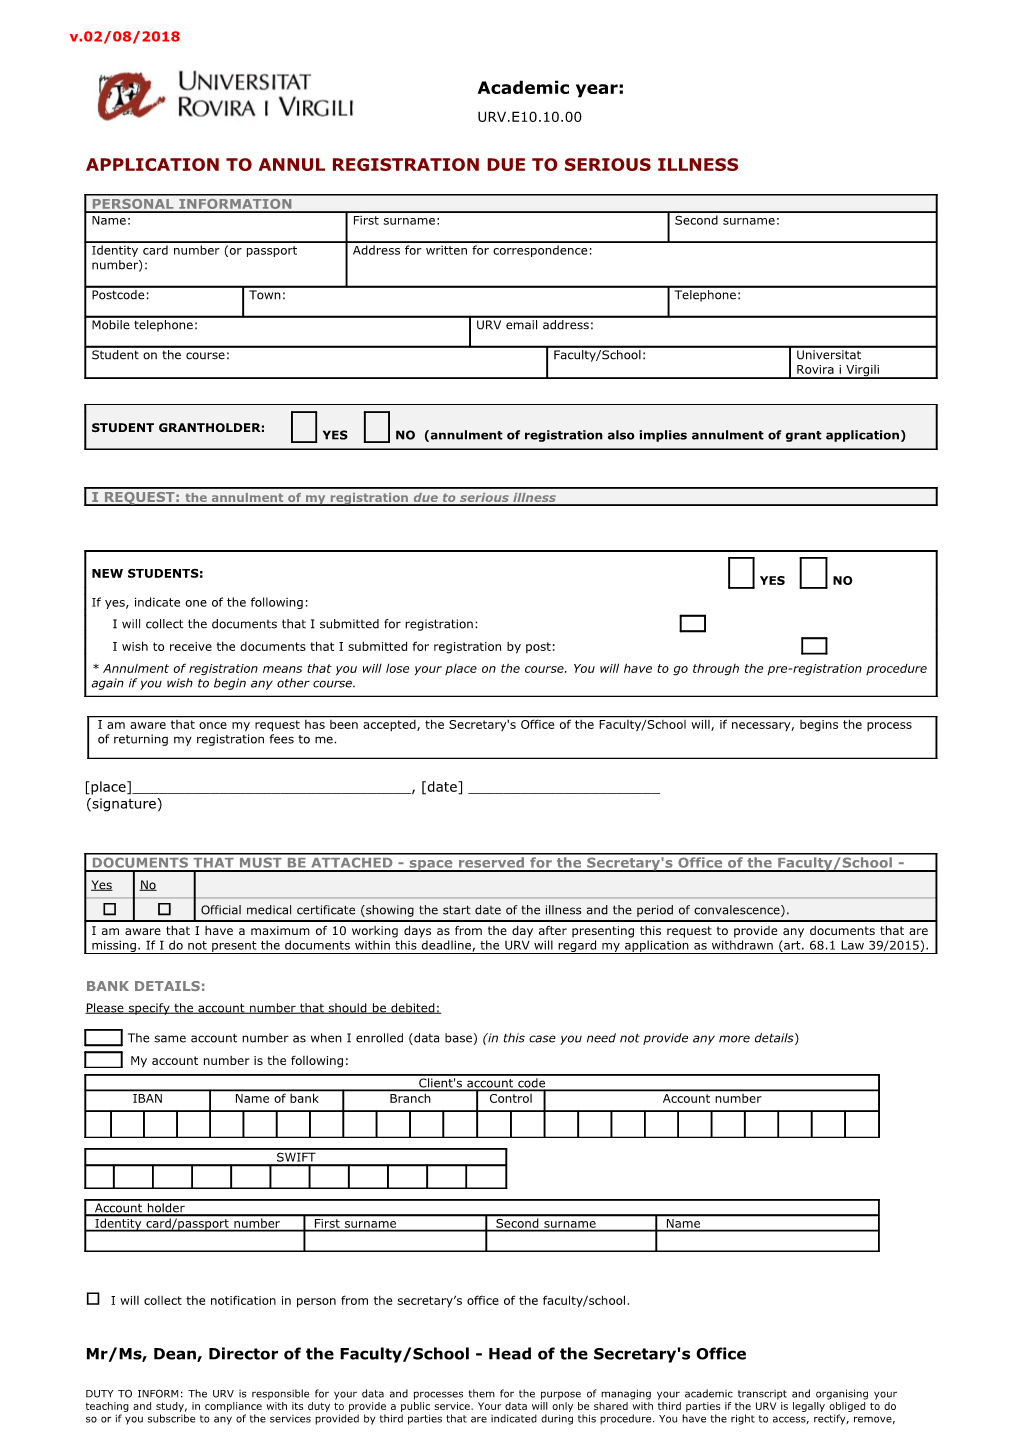 Application to Annul Registration Due to Serious Illness